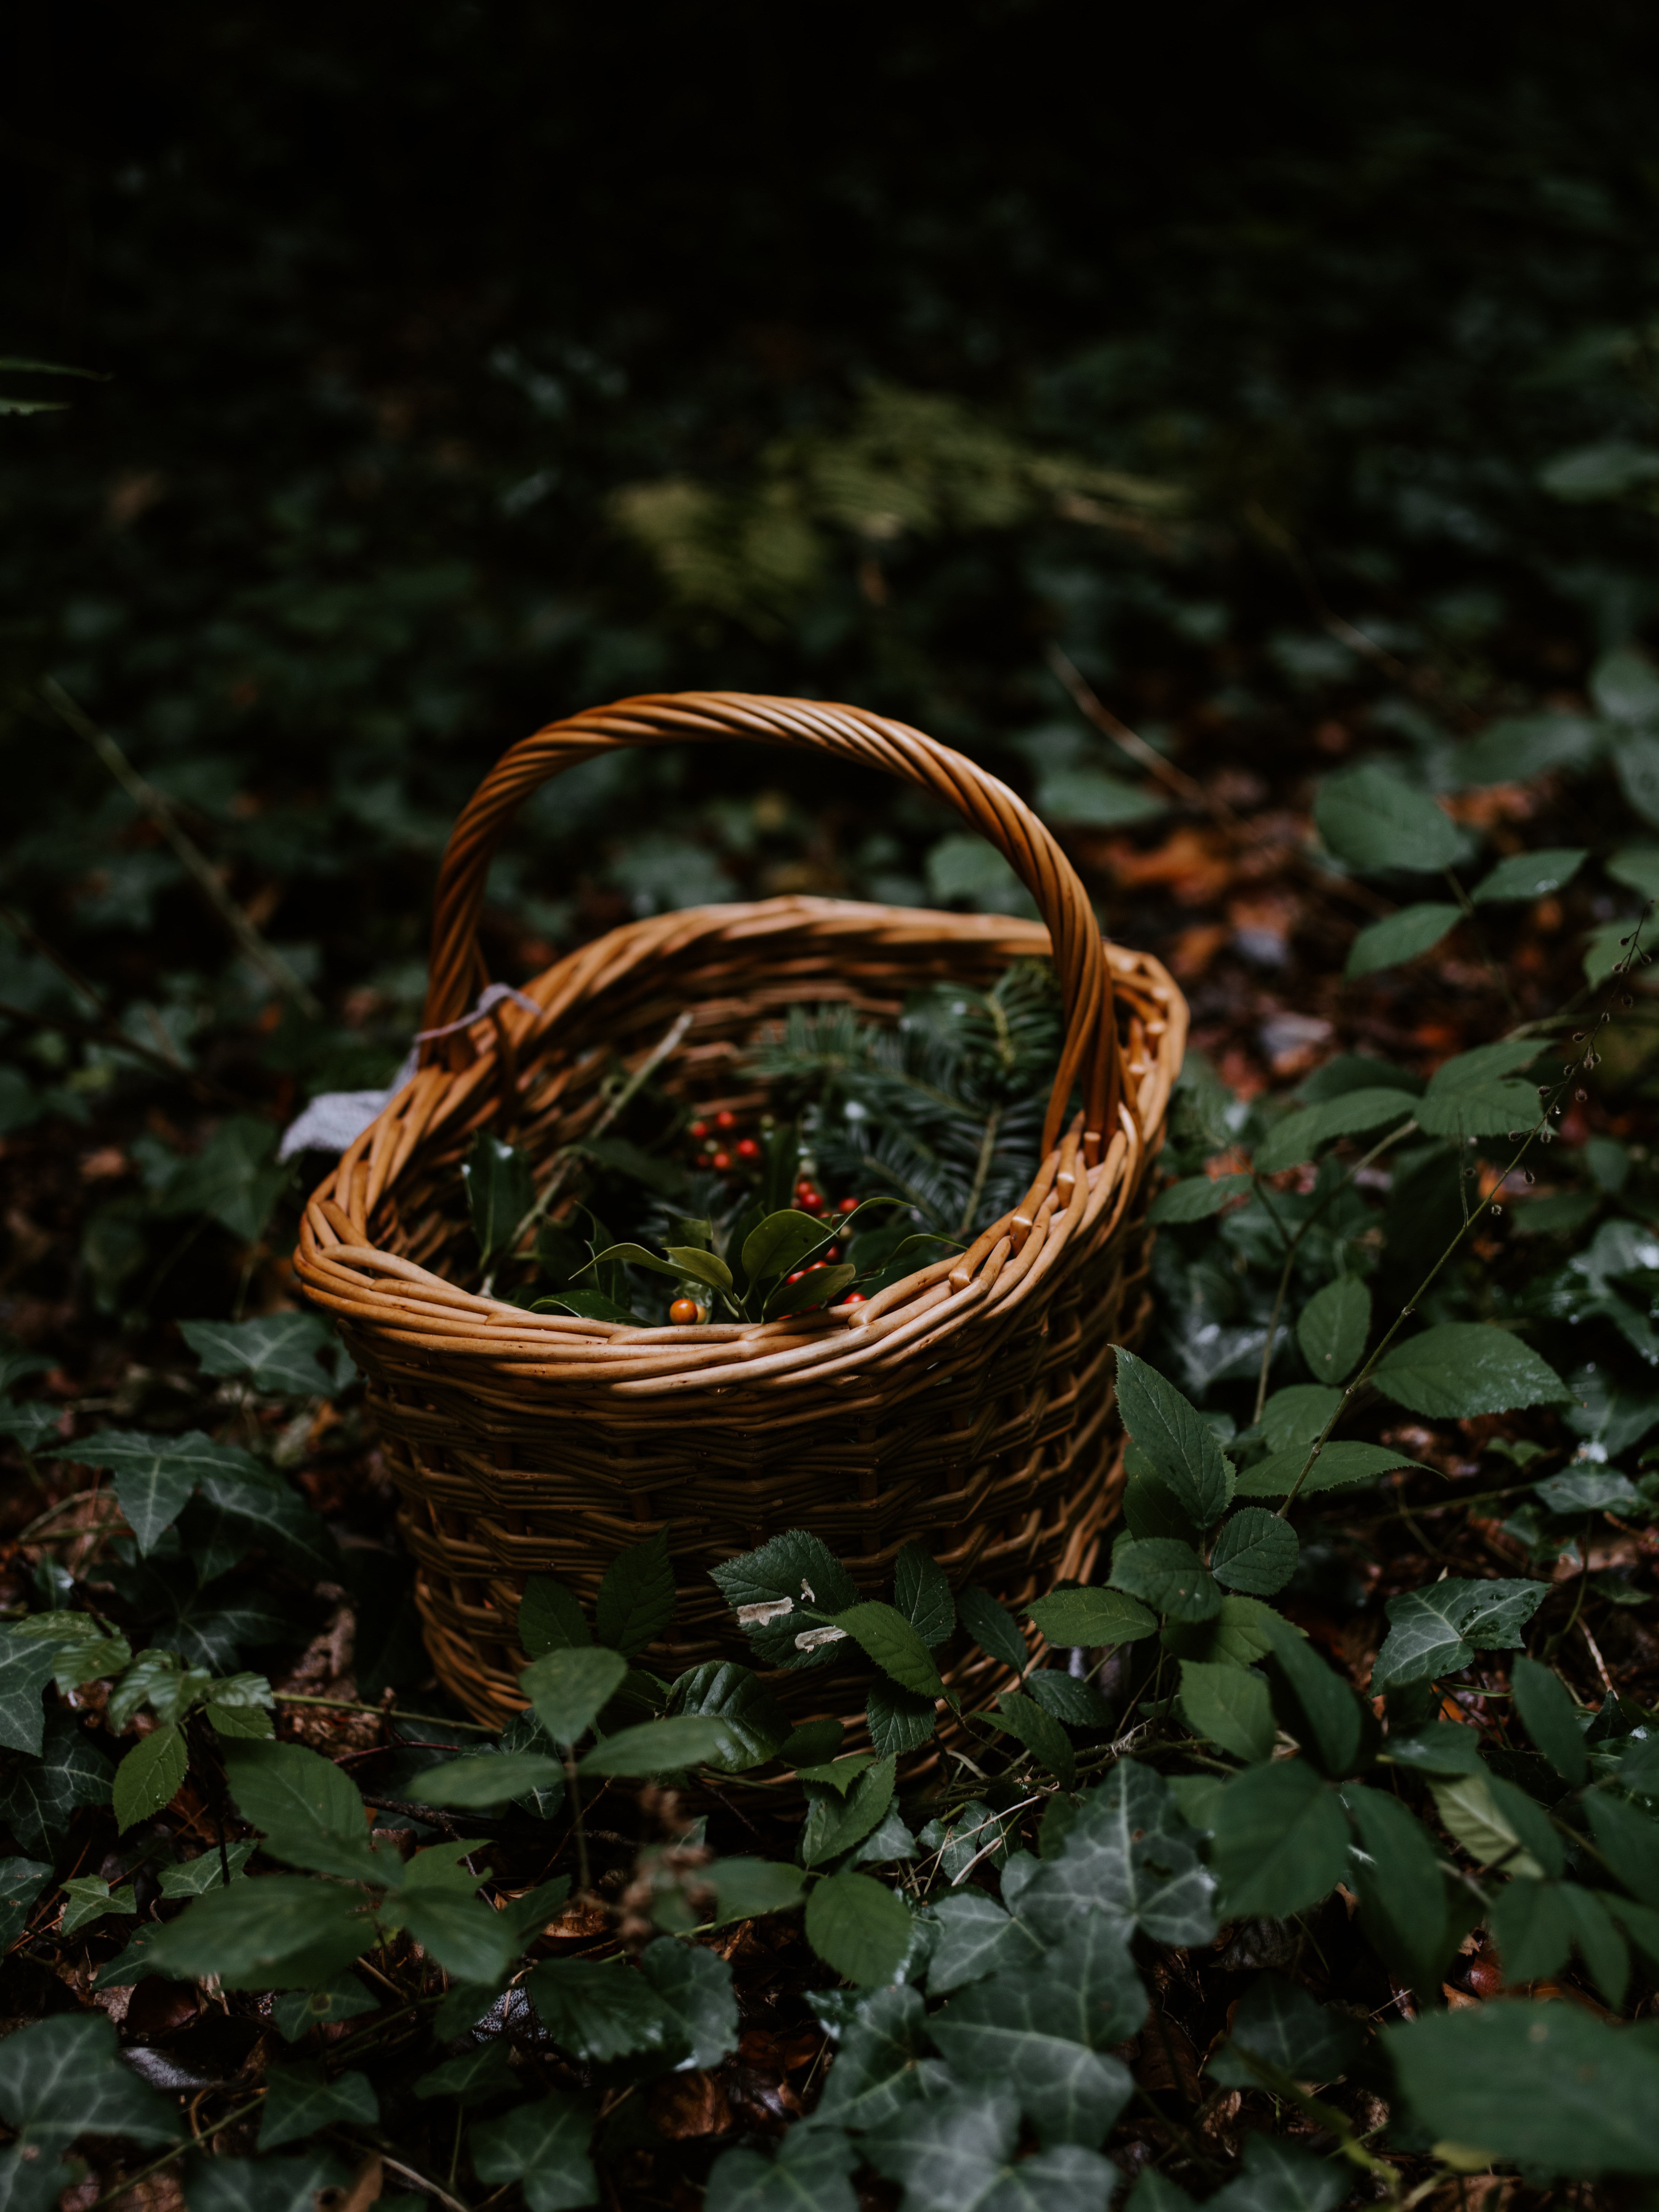 miscellaneous, nature, berries, miscellanea, branches, basket, wicker, braided cellphone